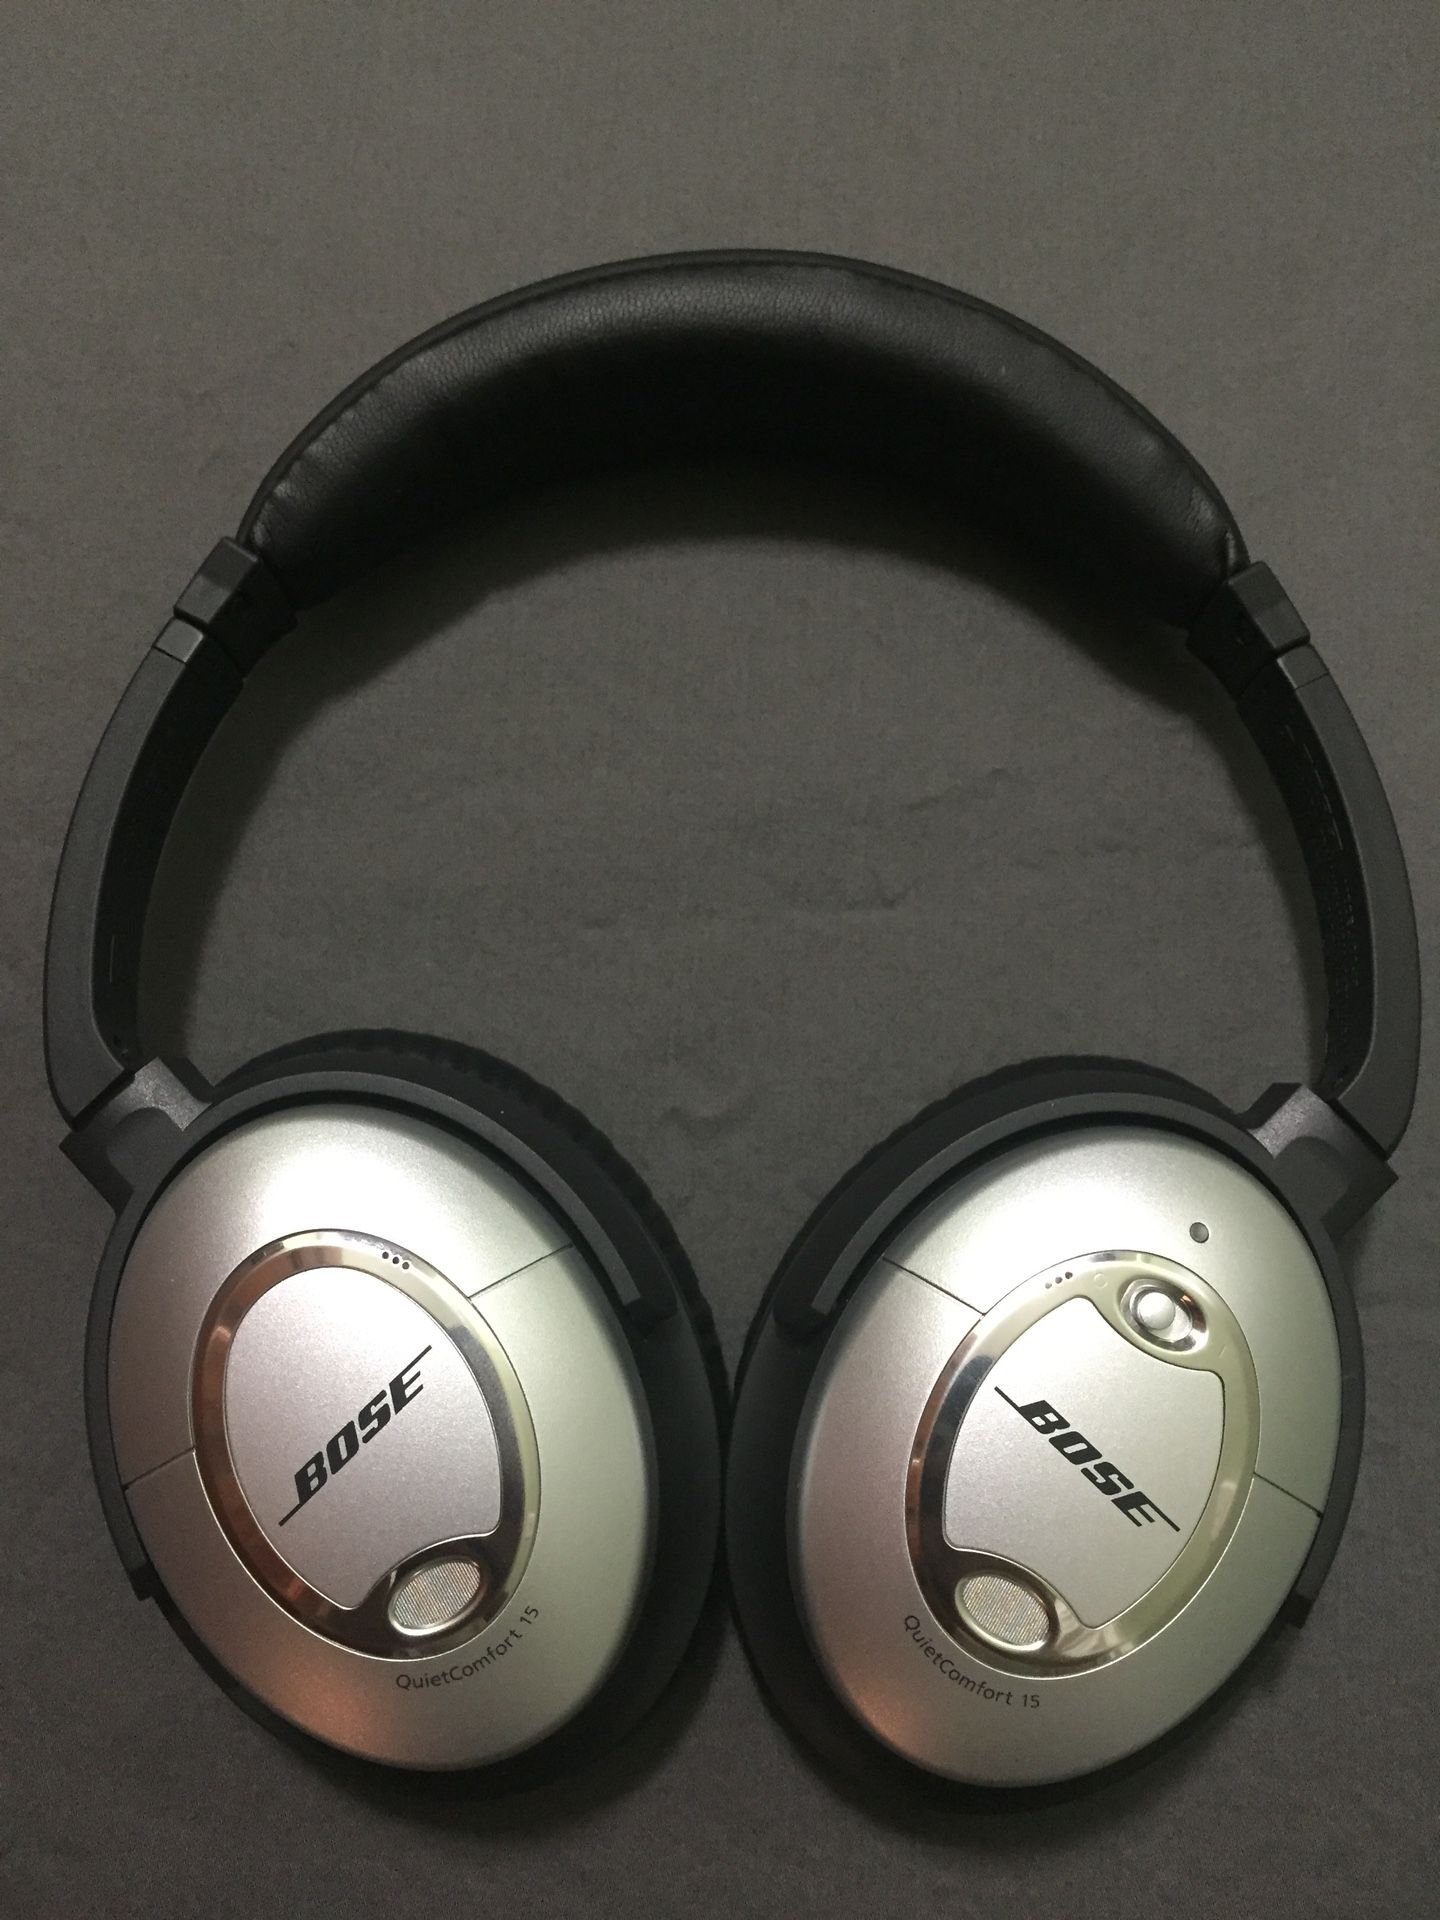 Bose Q15 Noise Cancelling Headphones (NOT BLUETOOTH)